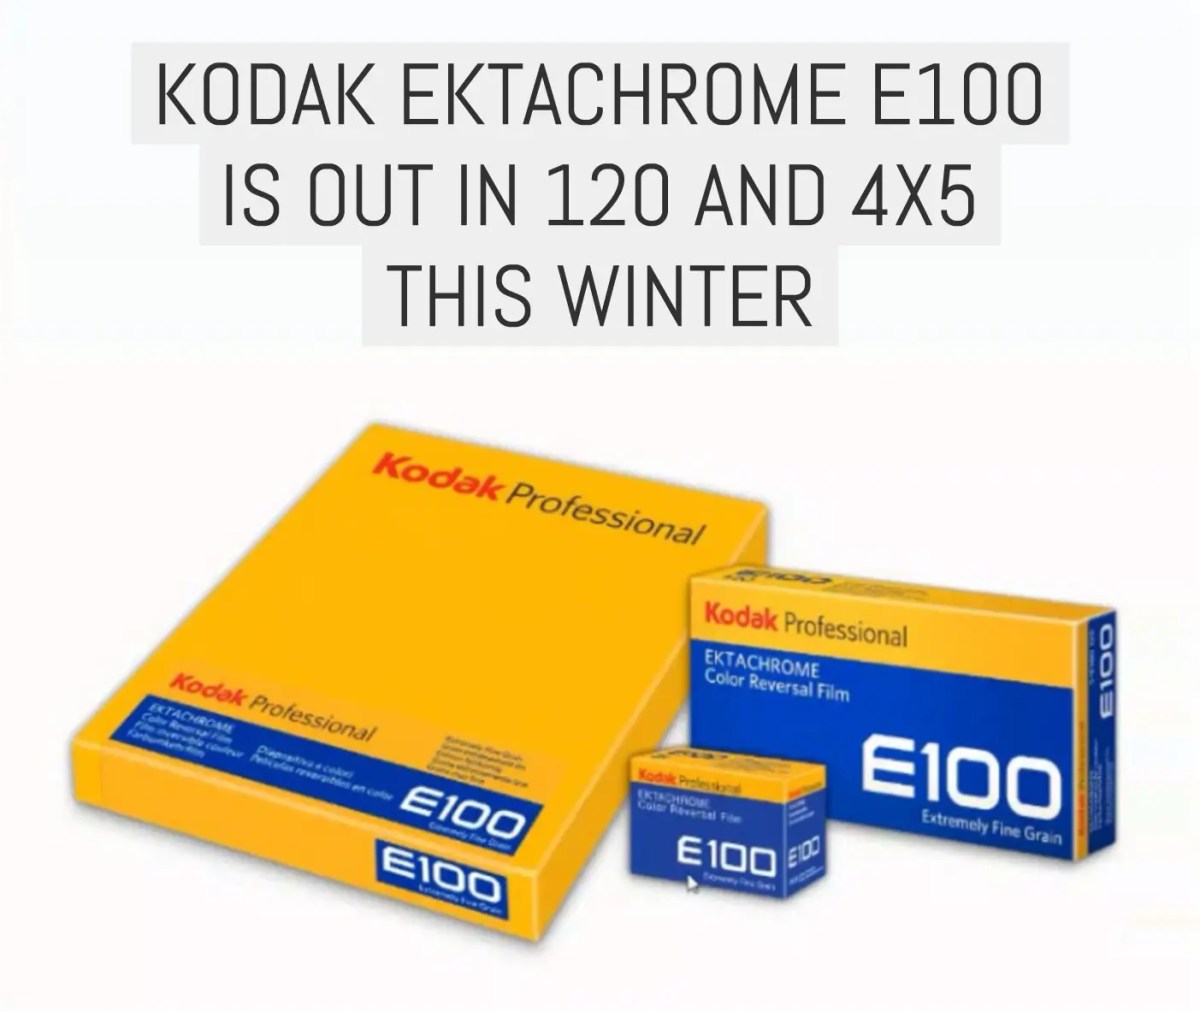 Kodak EKTACHROME E100 is out in 120 and 4x5 this winter